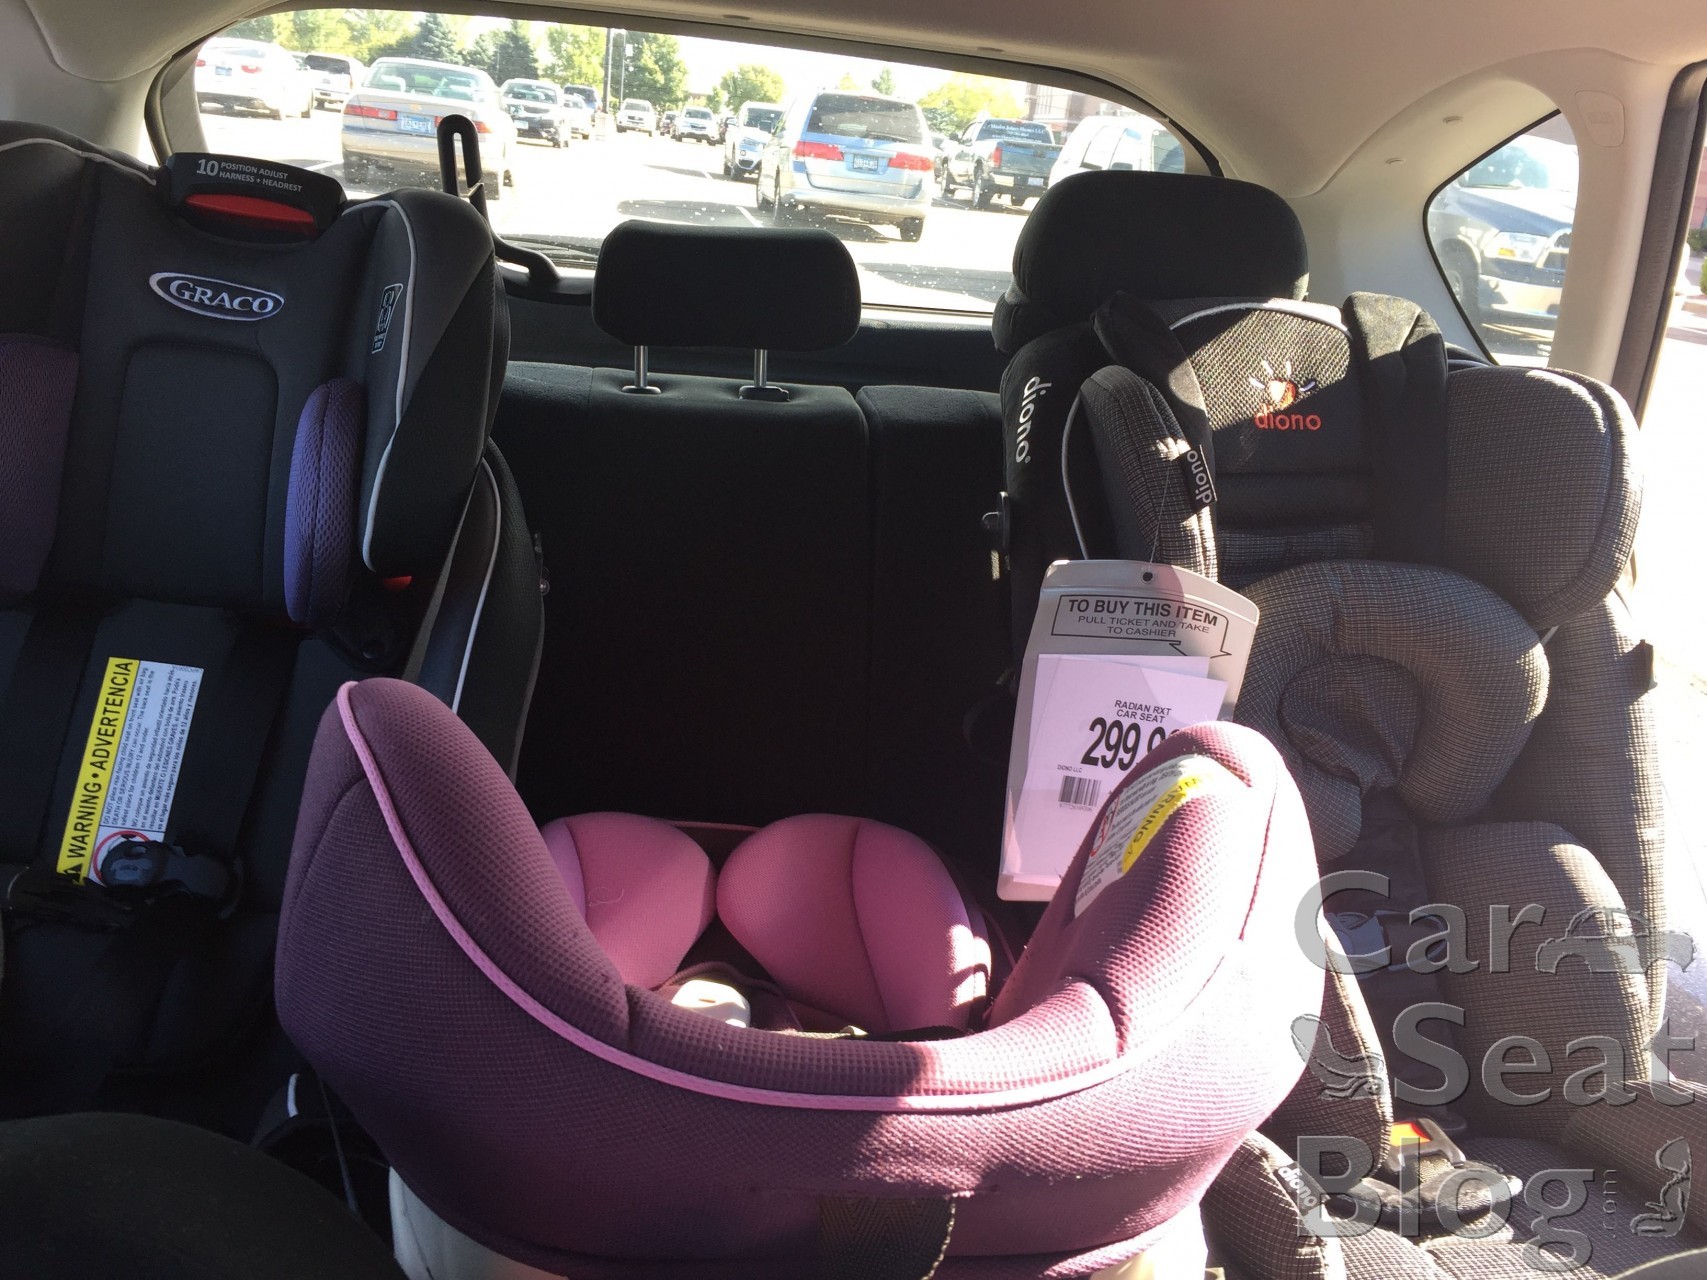 graco slimfit all in one car seat